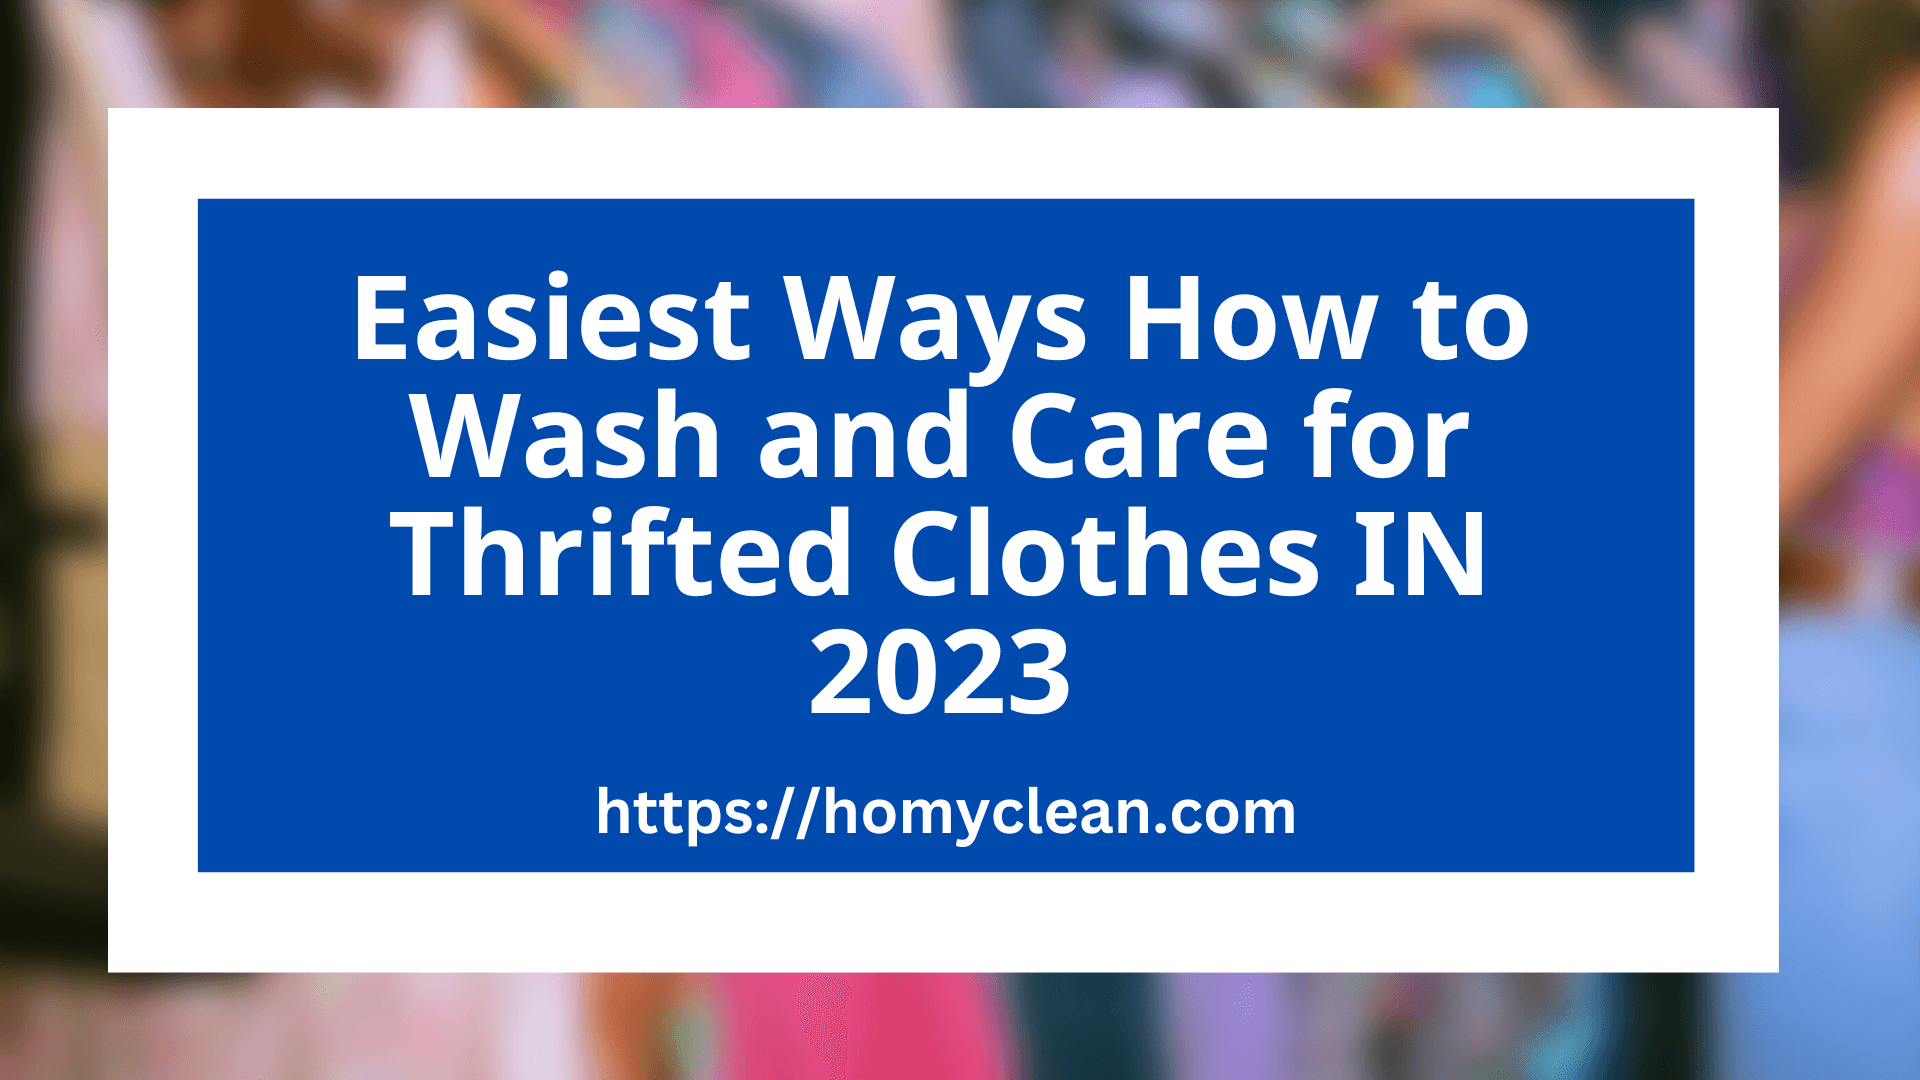 Wash and Care for Thrifted Clothes